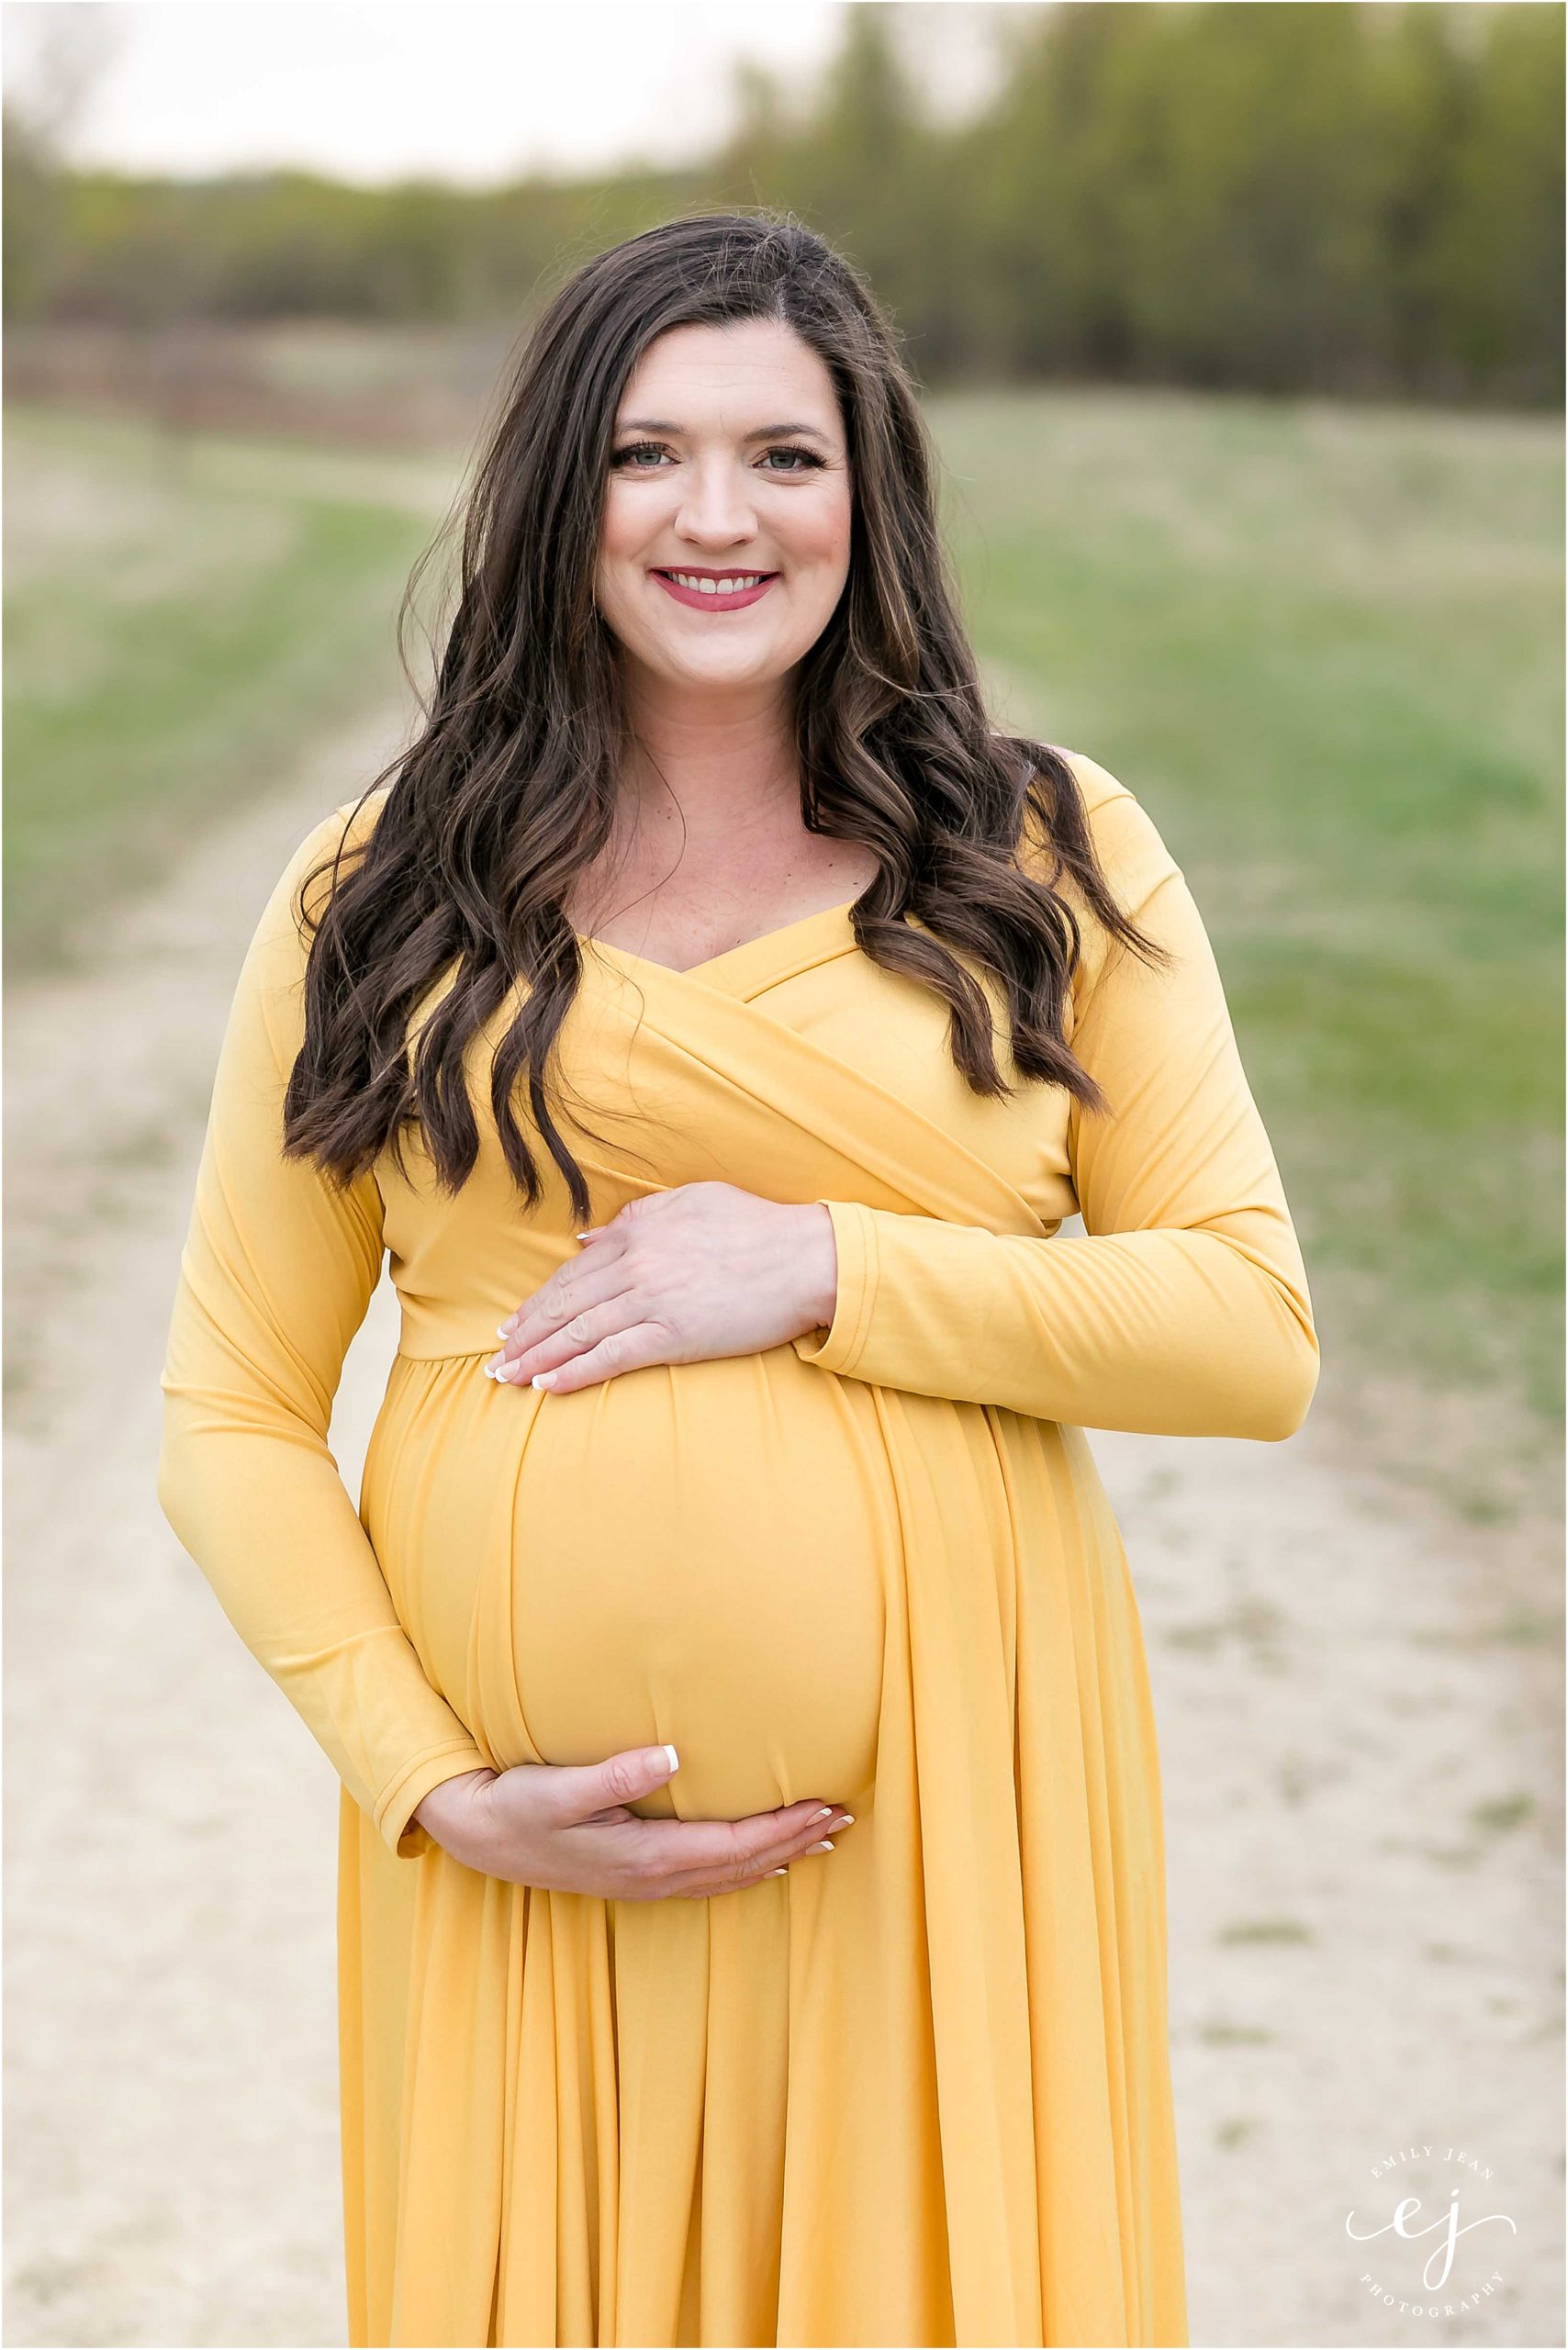 Pregnant woman wearing yellow dress with brown hair smiling at the camera holding belly